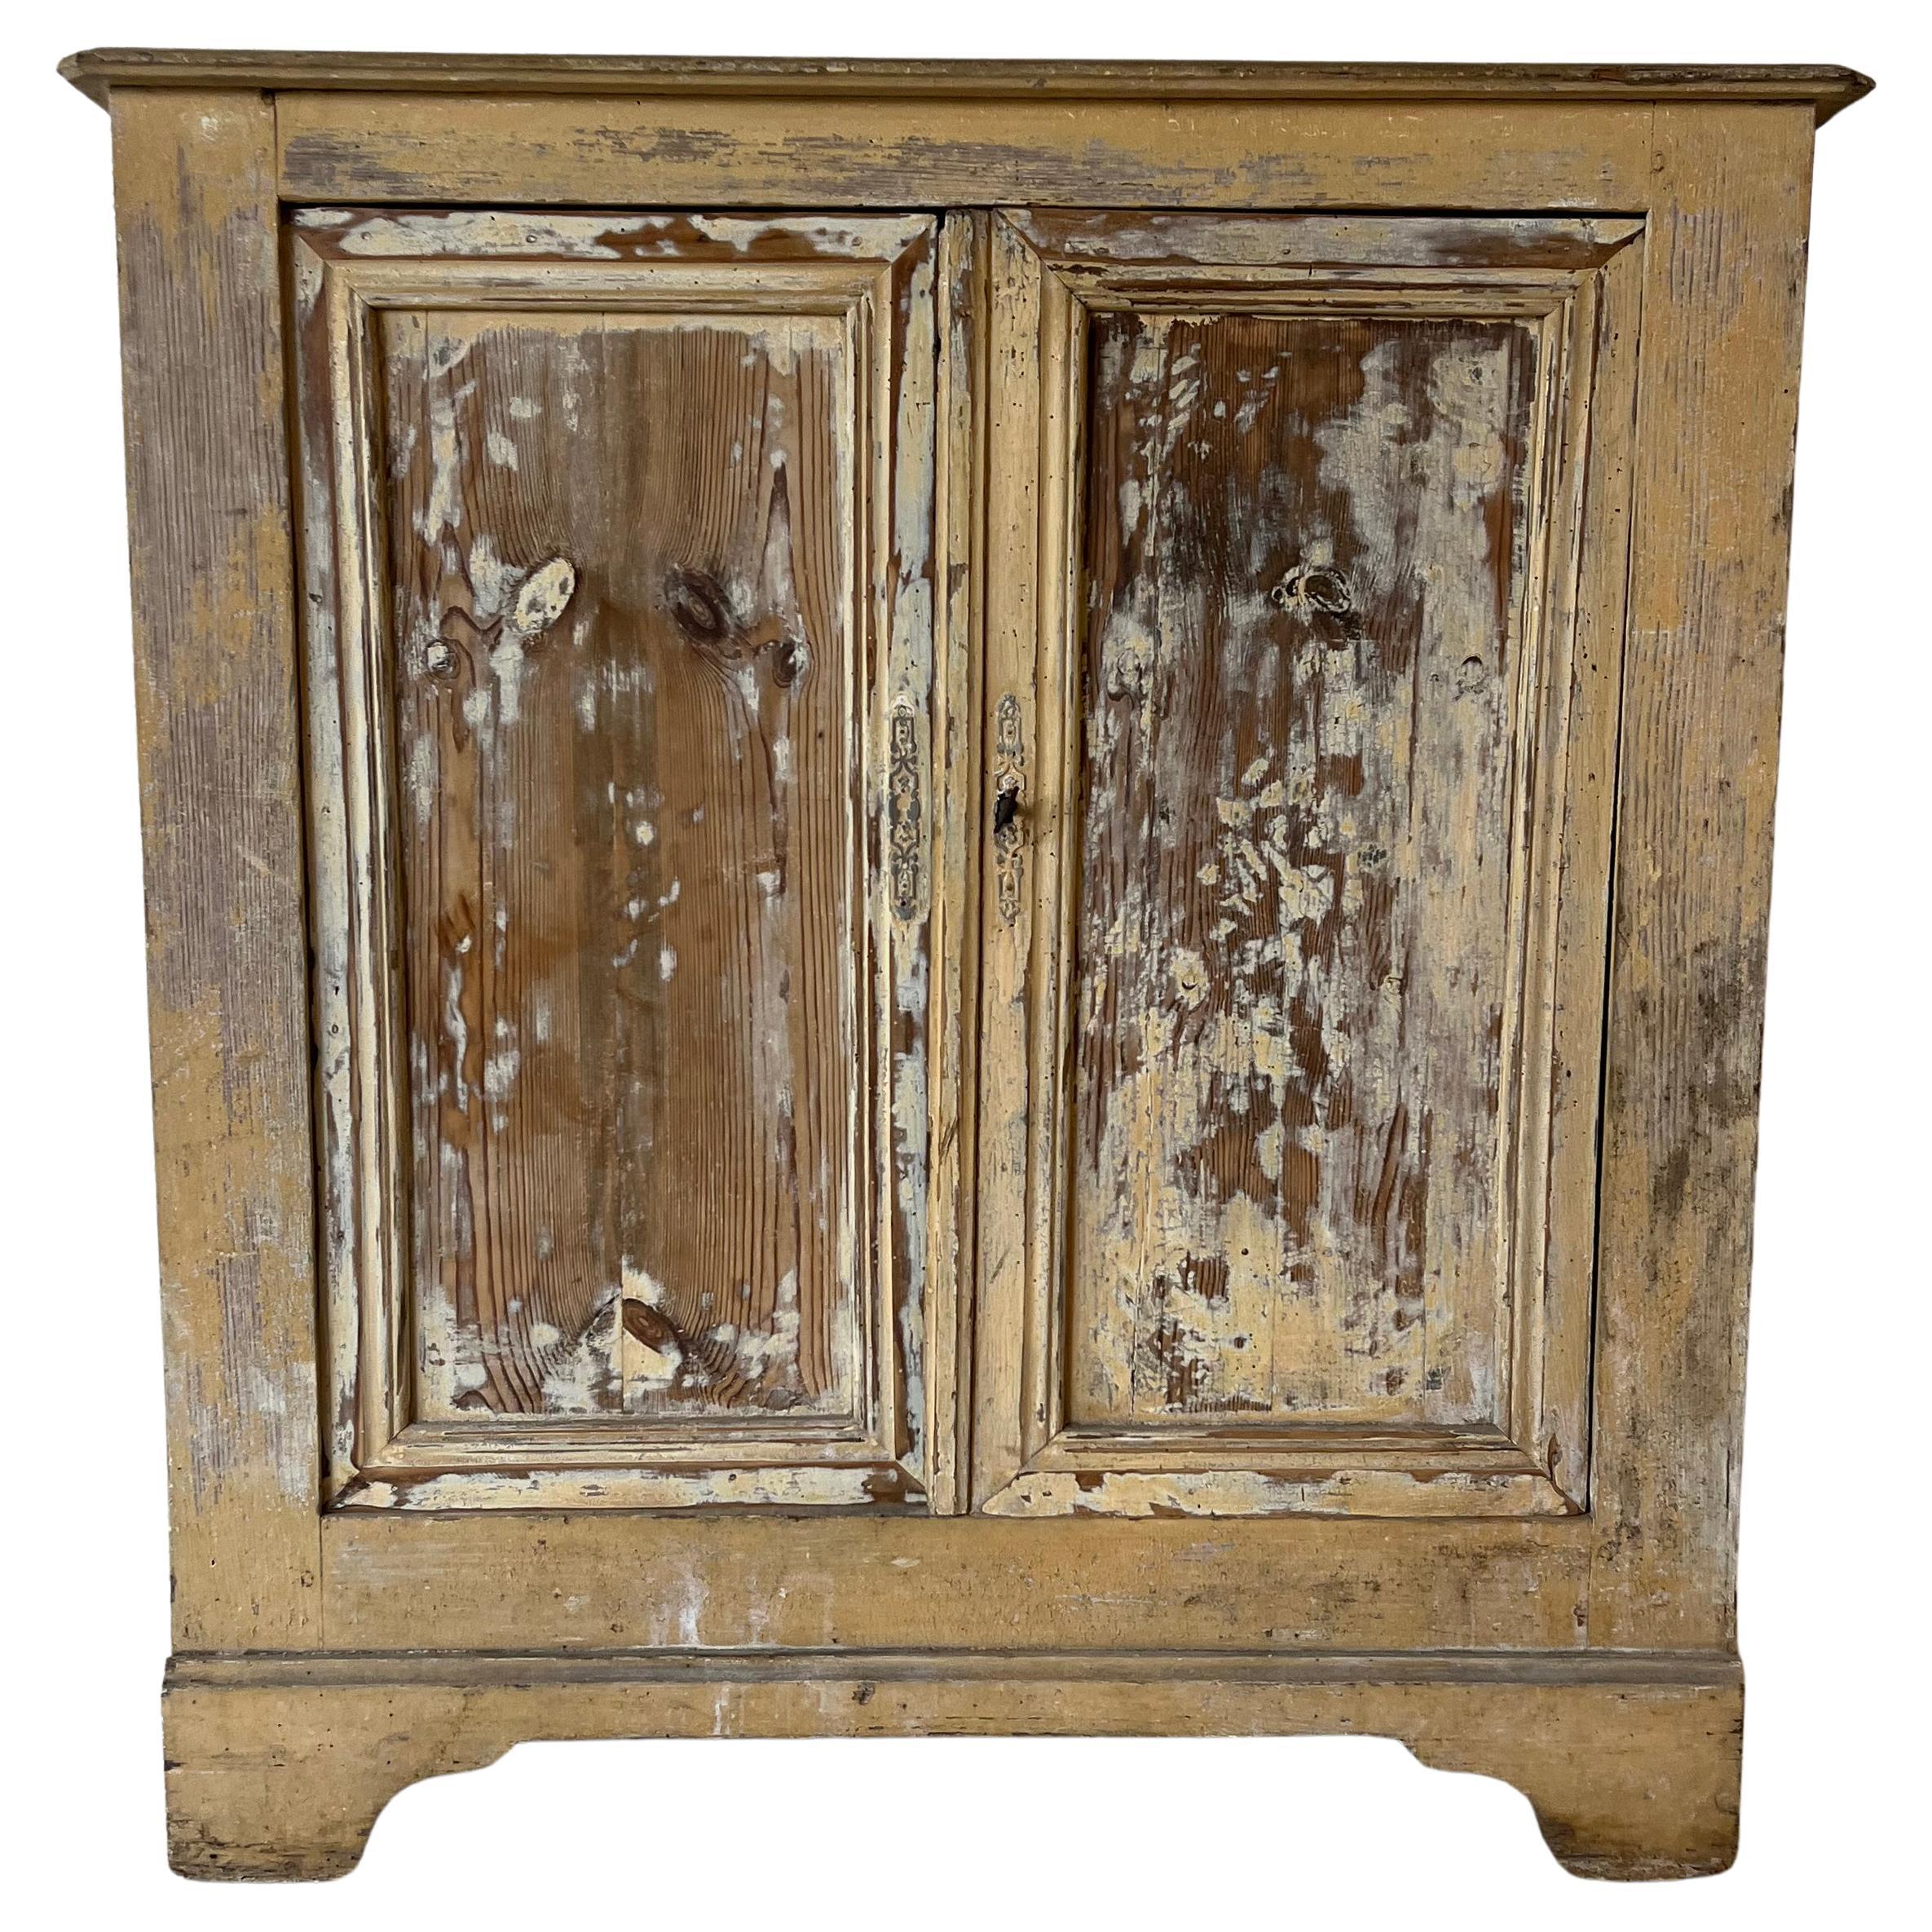 Early 1900's French Painted Cabinet